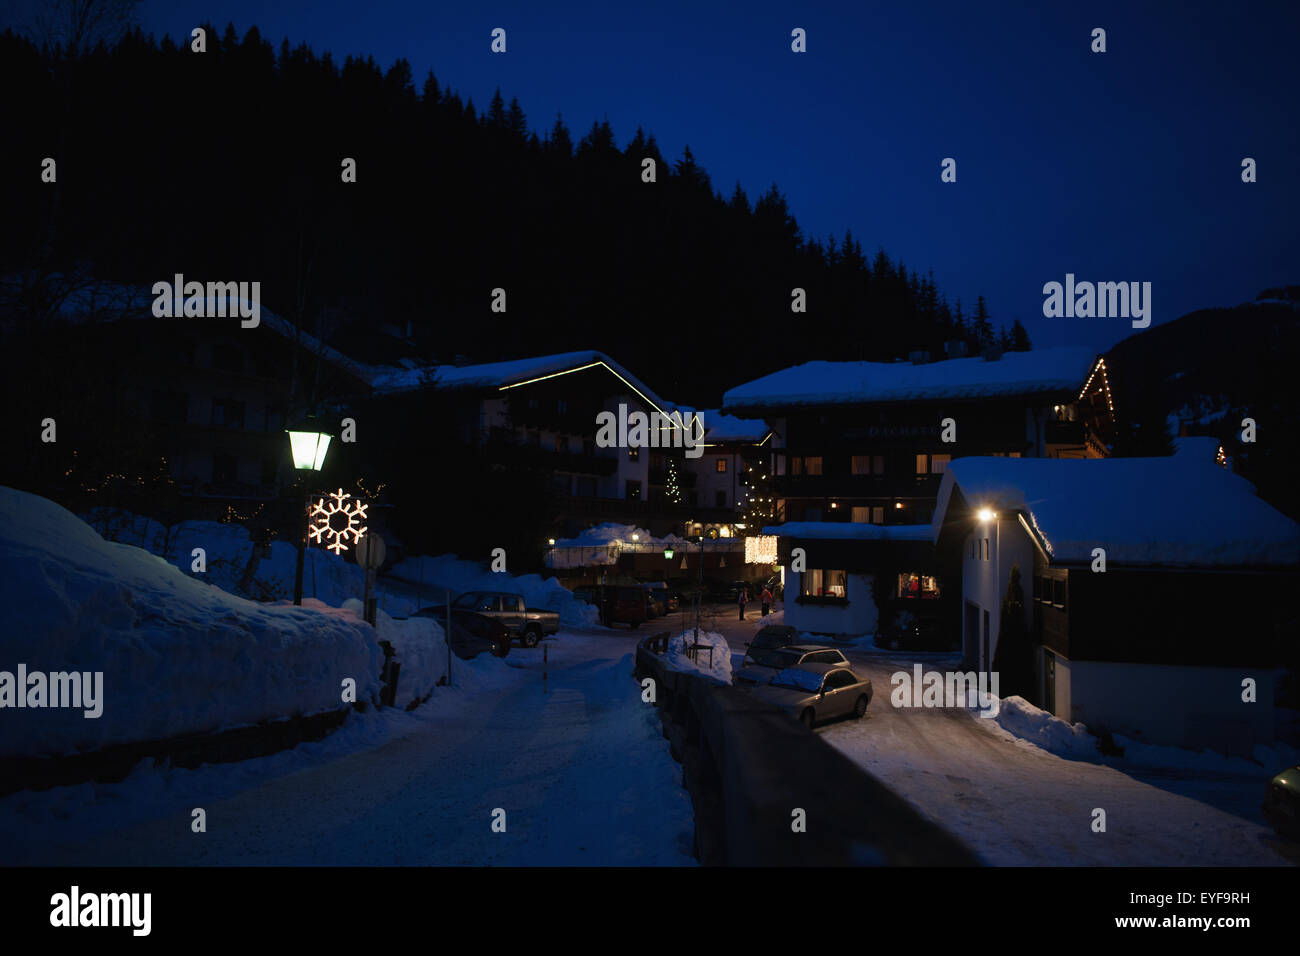 Snow covered rooves in the Alpine village at night with snowflake light and Christmas decorations; Filzmoos, Austria Stock Photo